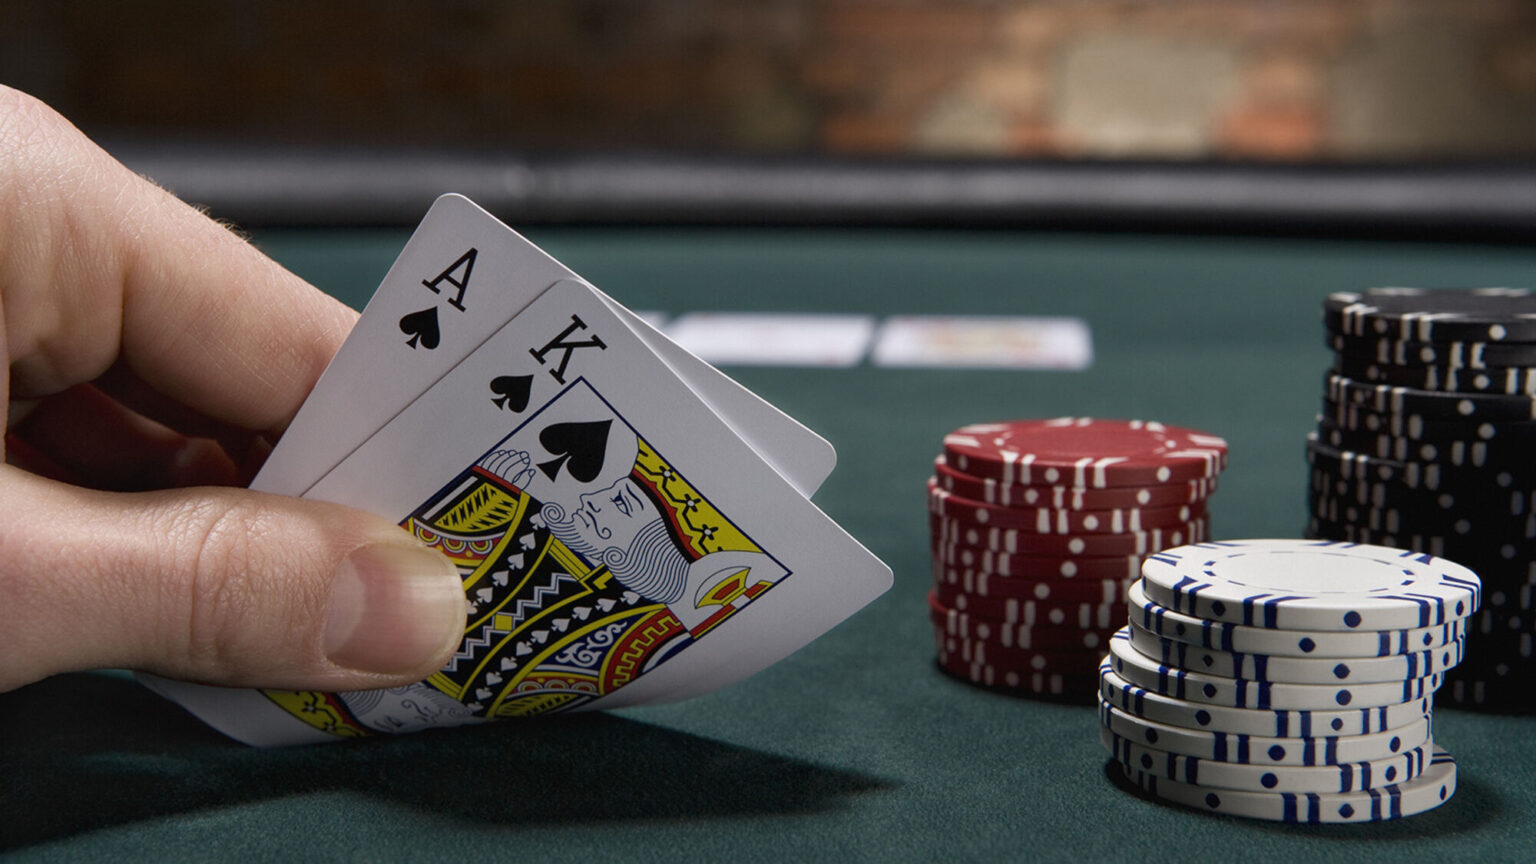 Is blackjack still cool? Looks like everyone is still playing blackjack over a century later. Here's why the card game will never go out of style.